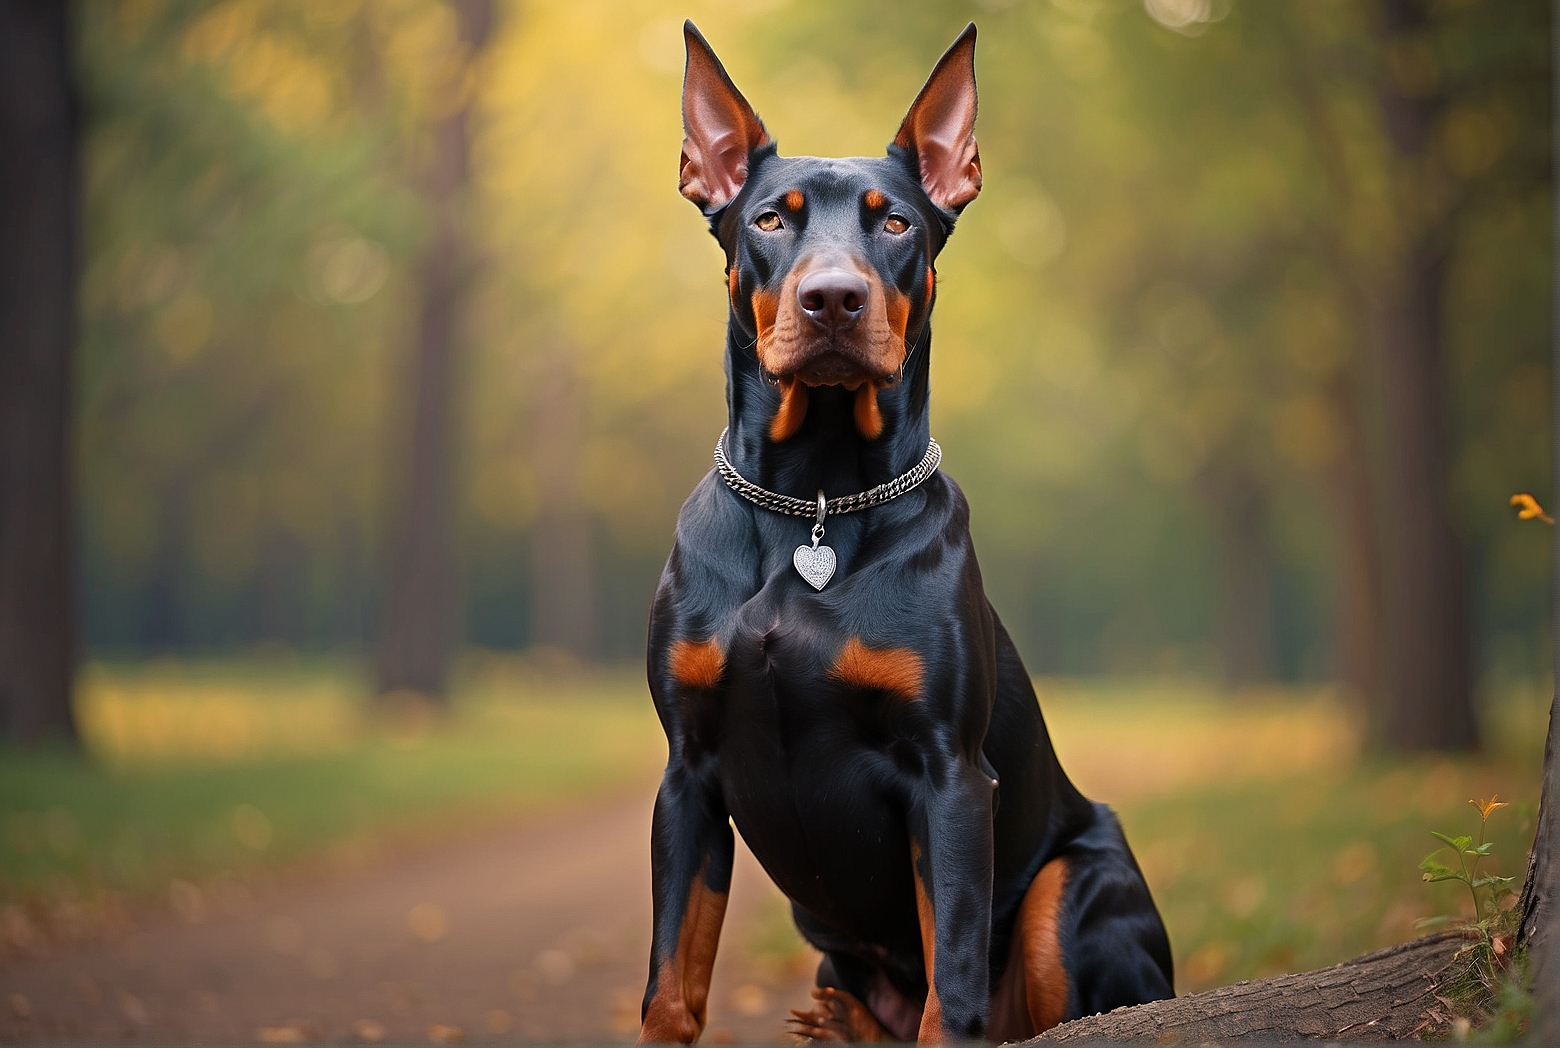 How Much Does a Doberman Cost?